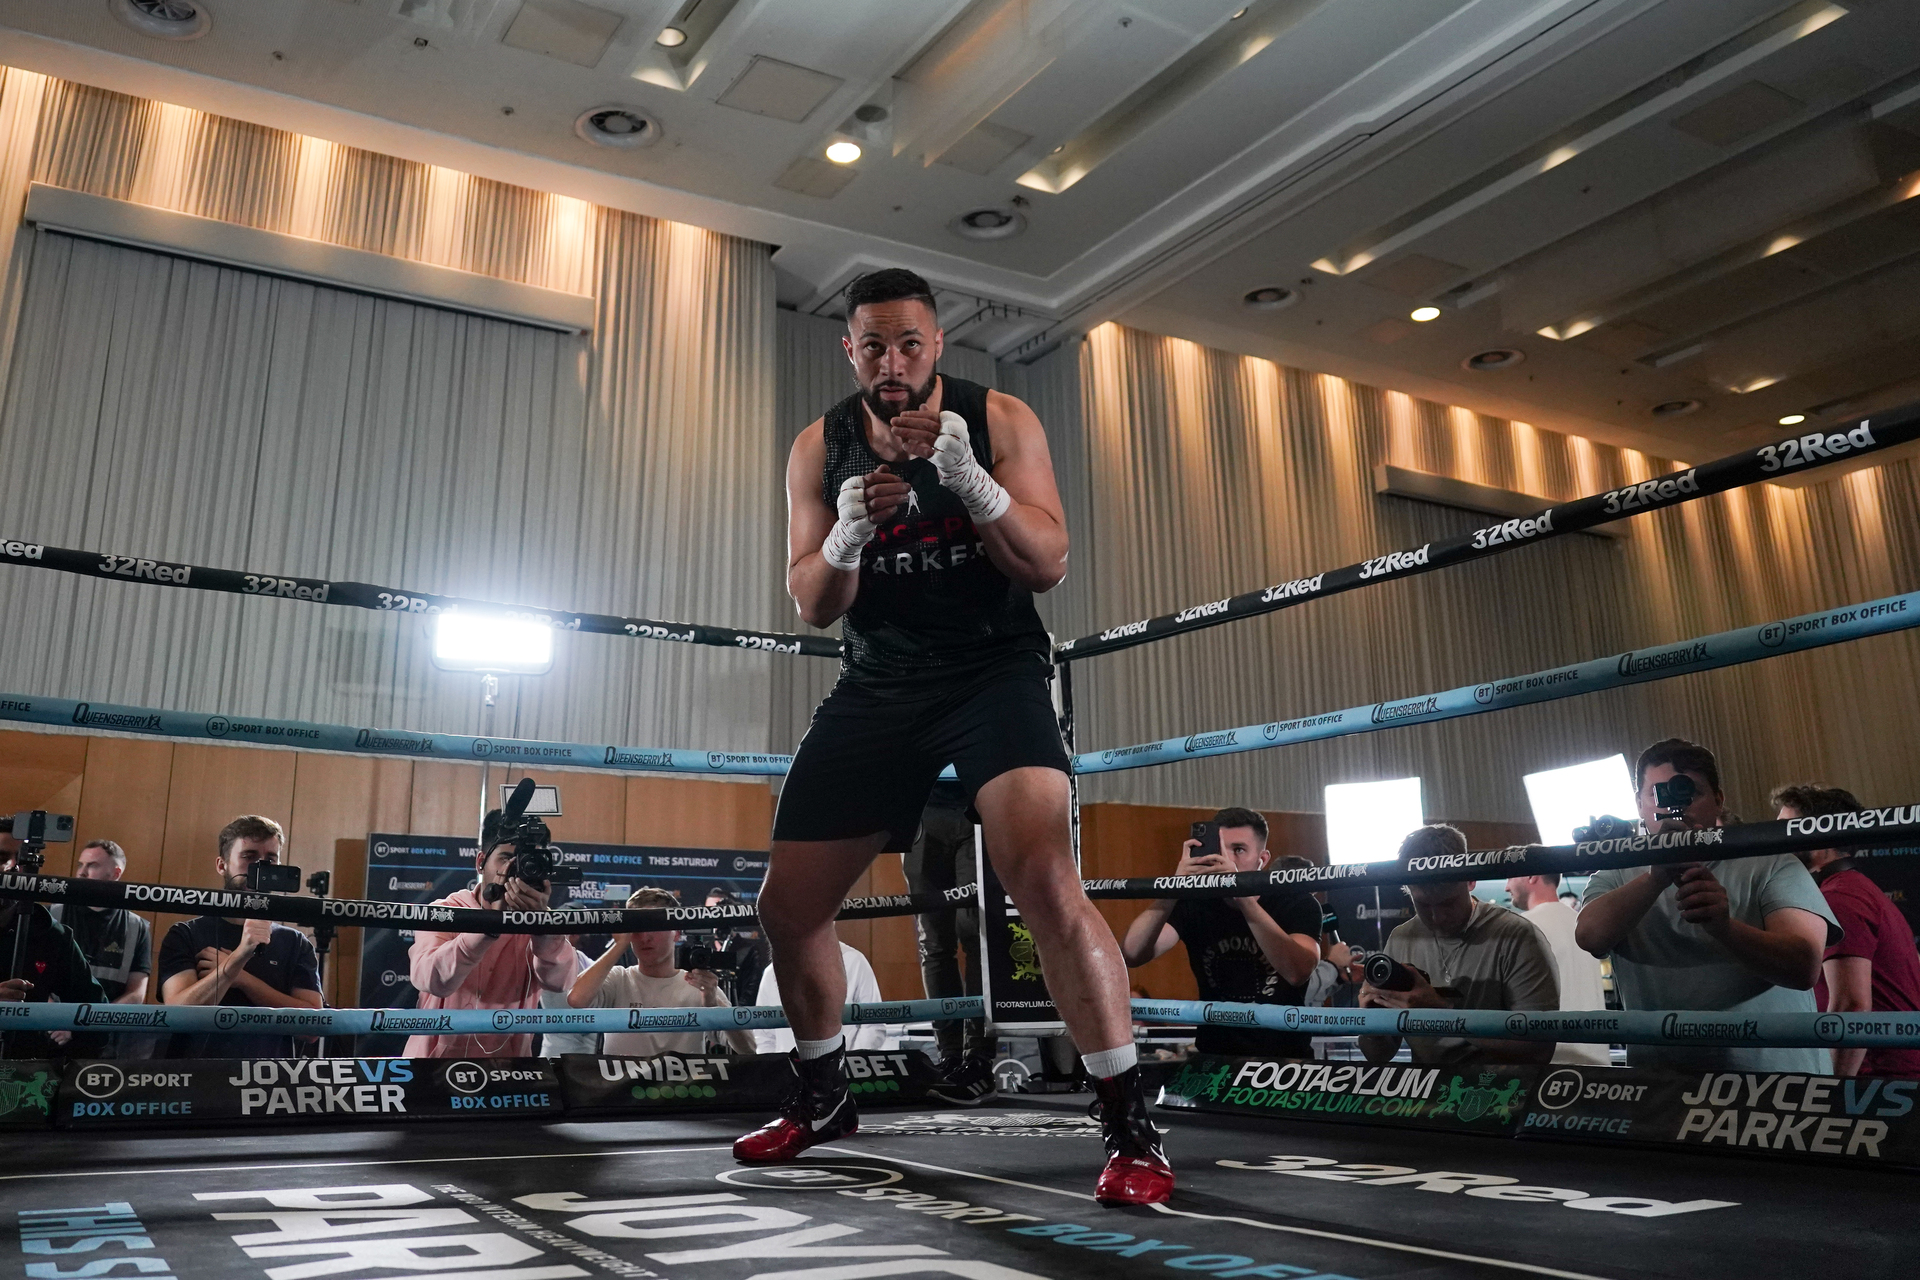 Boxing Joseph Parker v Joe Joyce - main event start time, fight undercard, odds, live streaming and how to watch